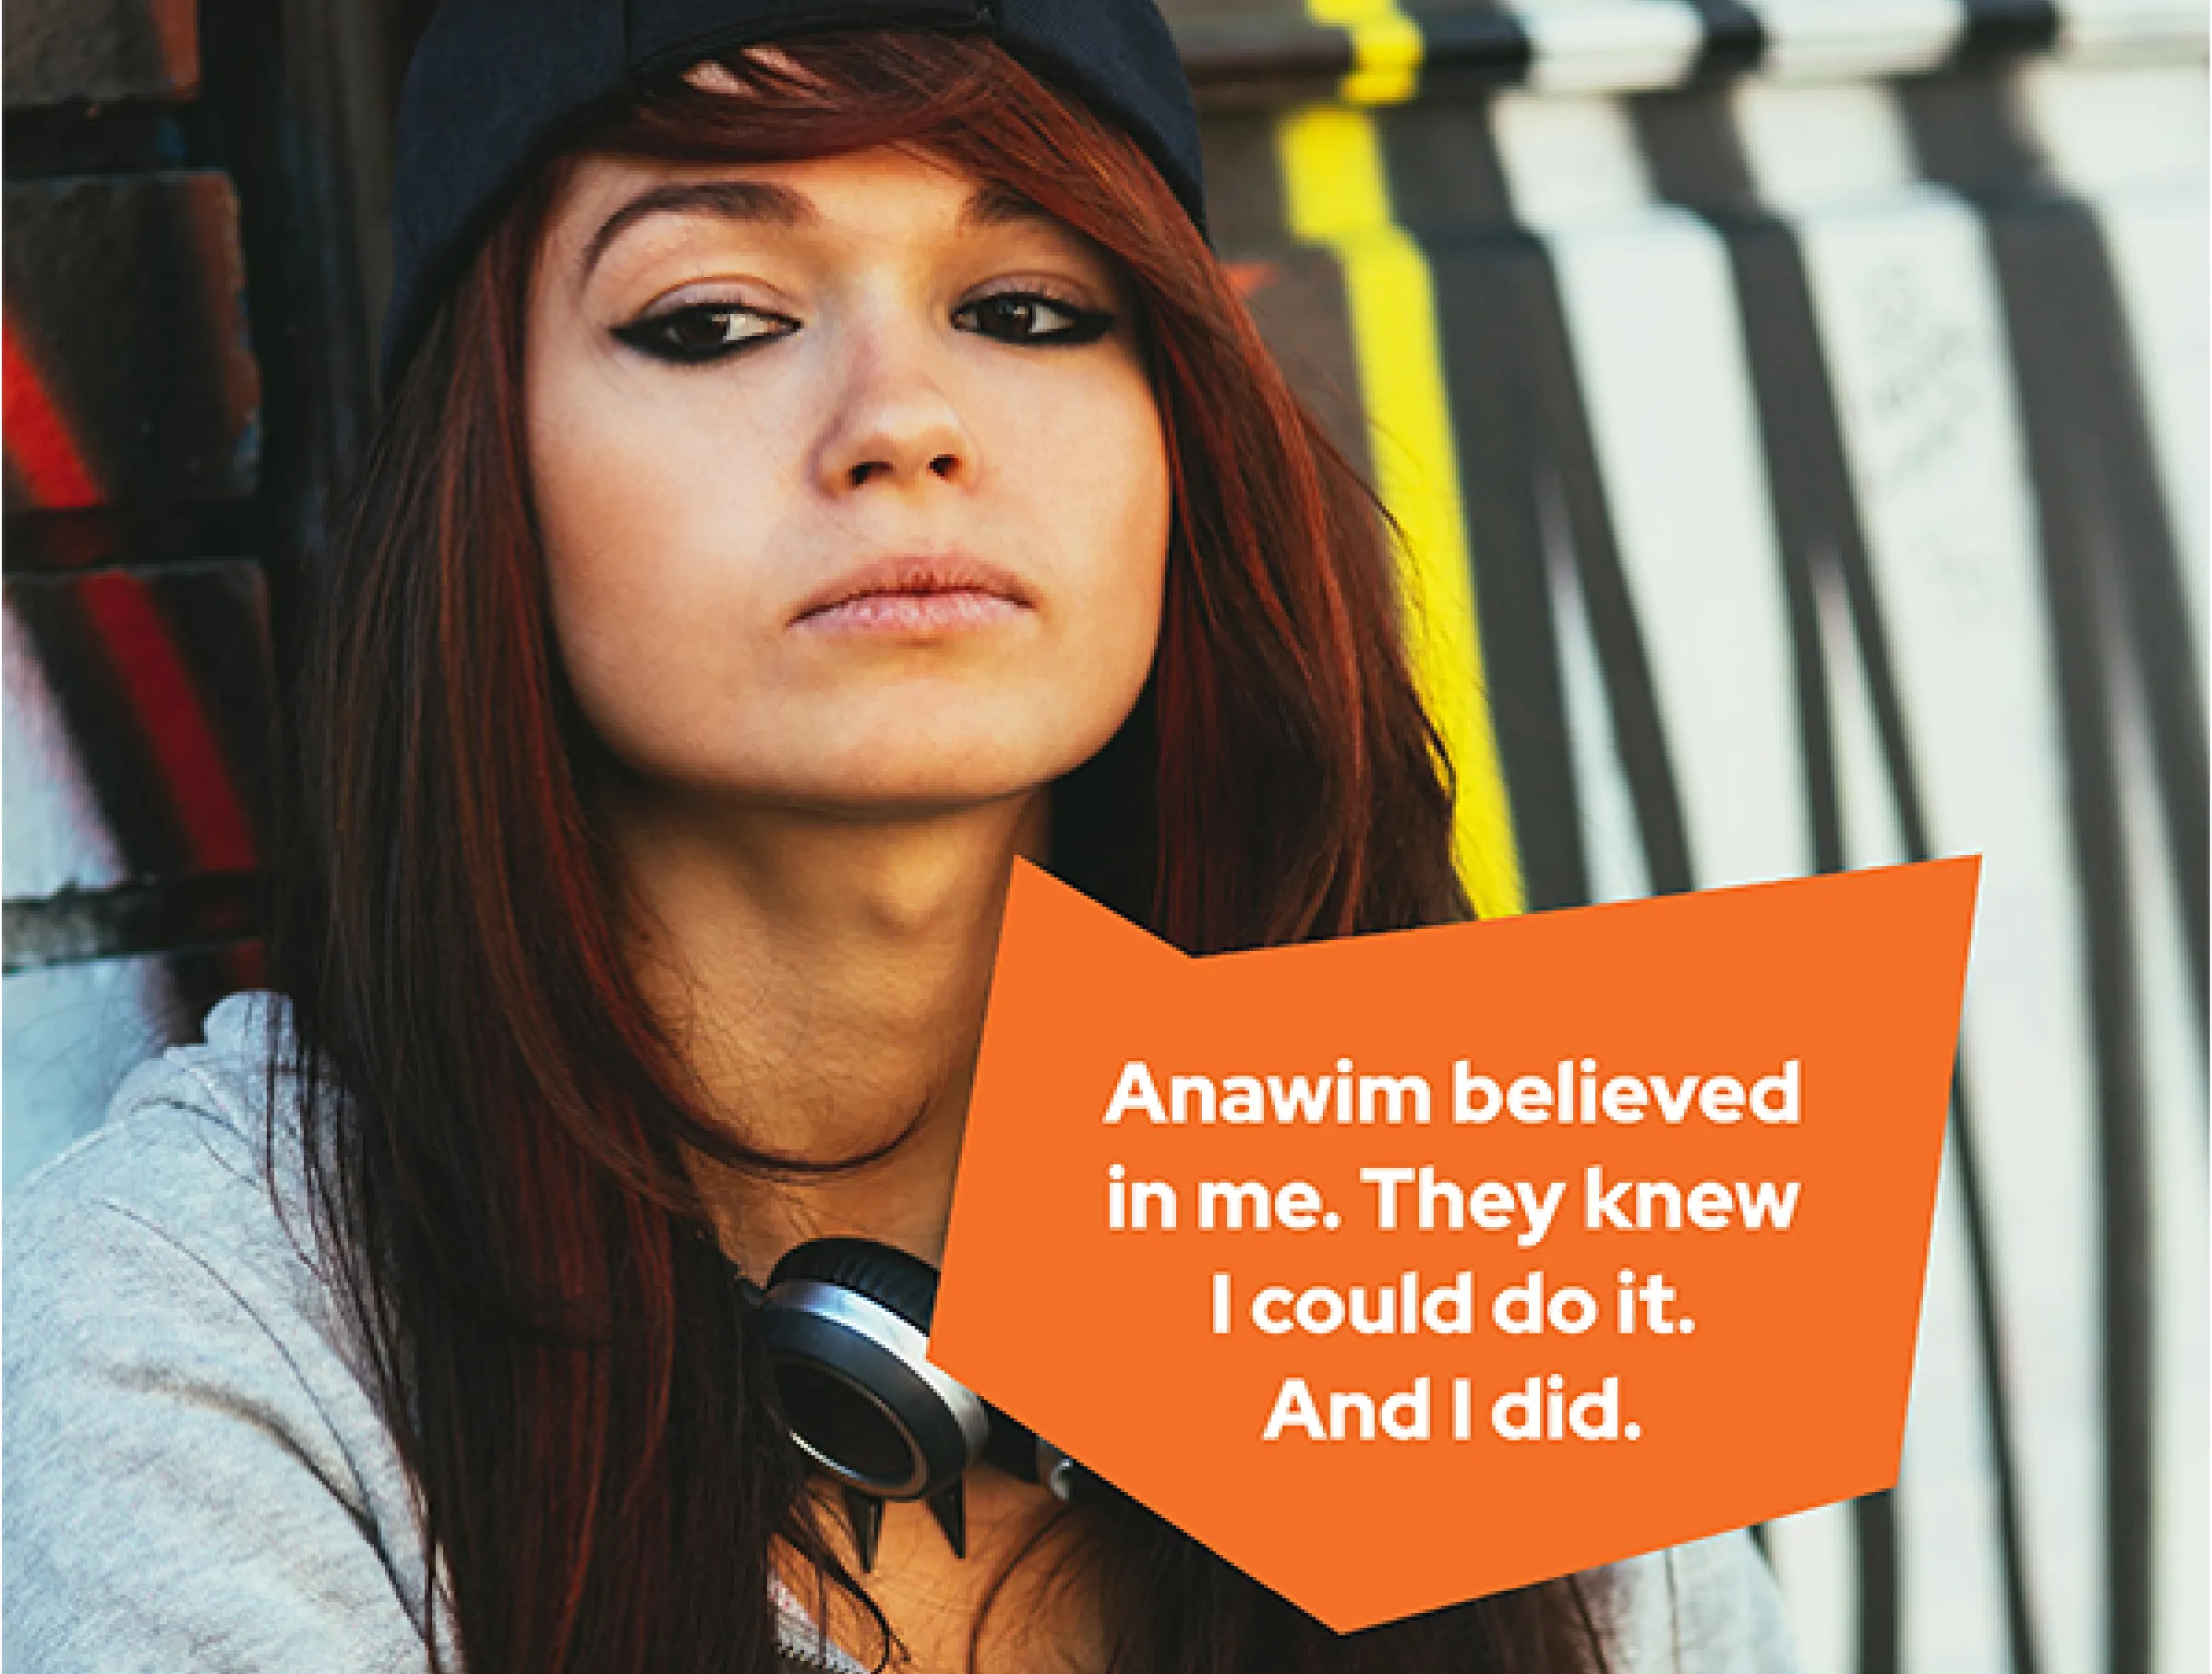 Anawim quote from a woman shown on an orange brand asset shape